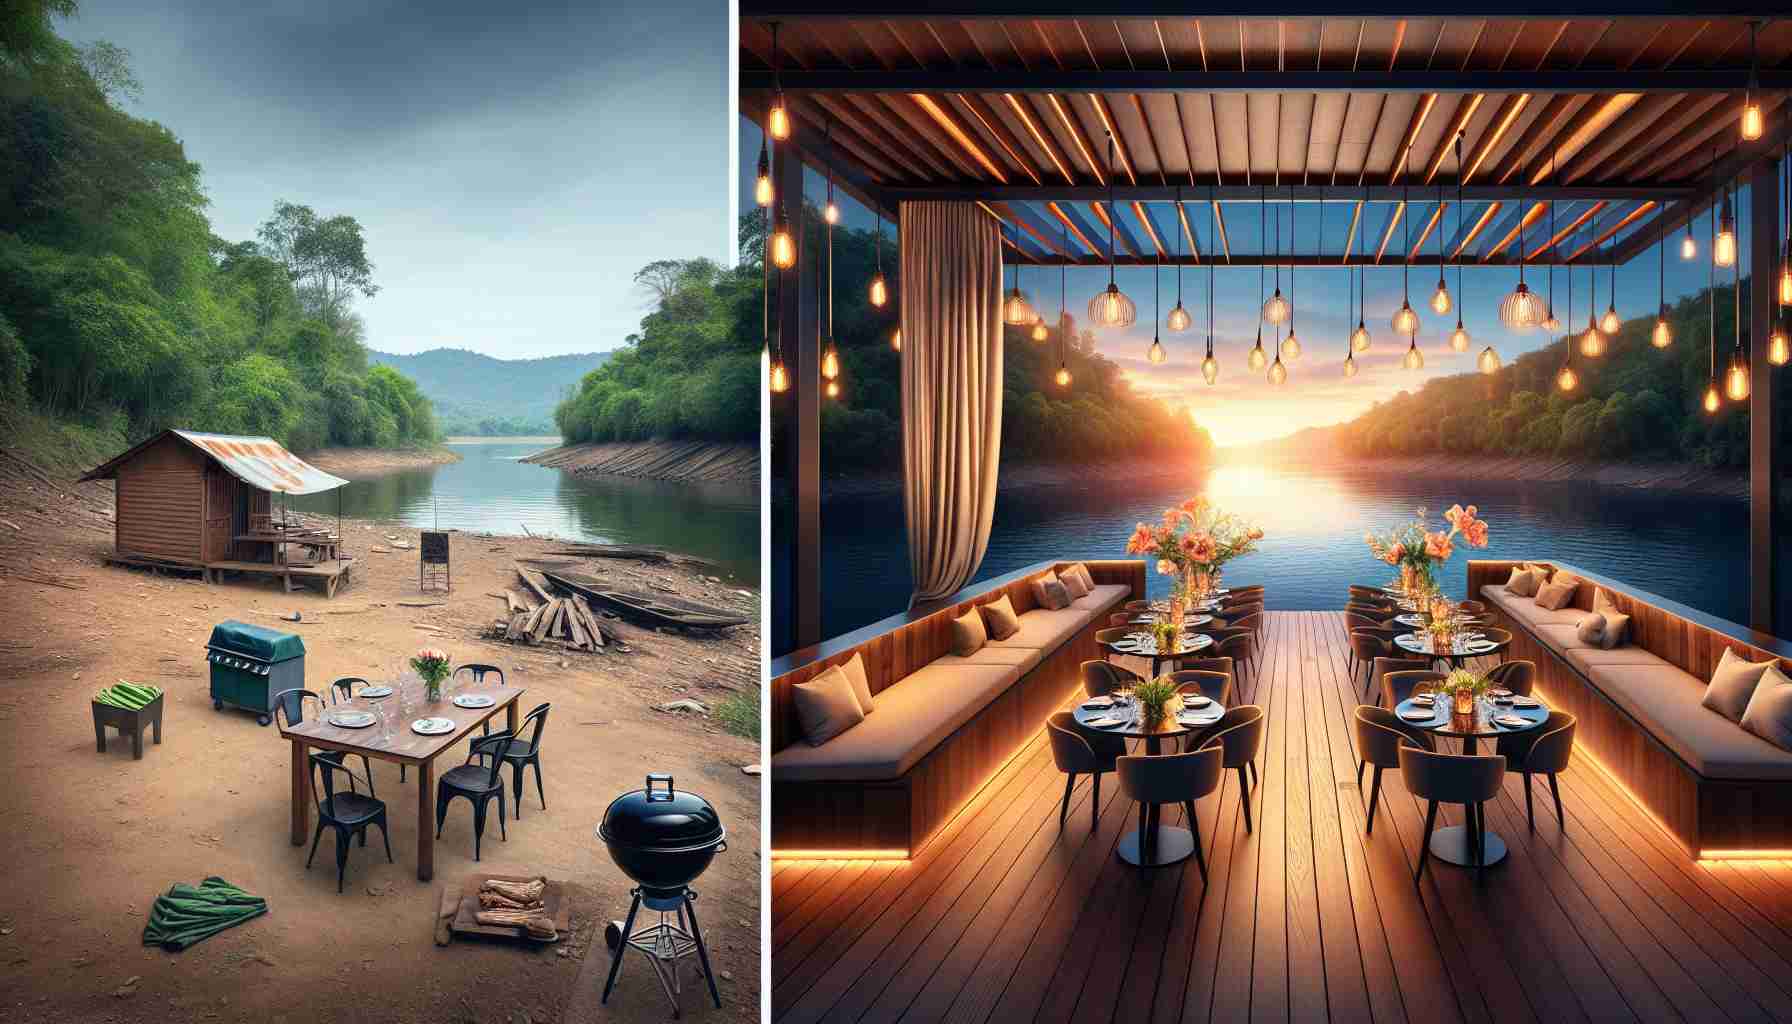 Create a realistic HD photo that represents the transformation of a riverside dining experience. The image could show a before and after scenario side by side. The 'before' picture might consist of a simple picnic setup on an unrefined riverside, with a few chairs and a table set up, perhaps a grill nearby and a simple cloth canopy for cover. The 'after' picture could depict an upscale outdoor riverside restaurant setup with sophisticated lighting, plush seating arrangement, a well-set, glossy dining table gleaming under ambient lights, and a grand wooden deck extending towards the water.